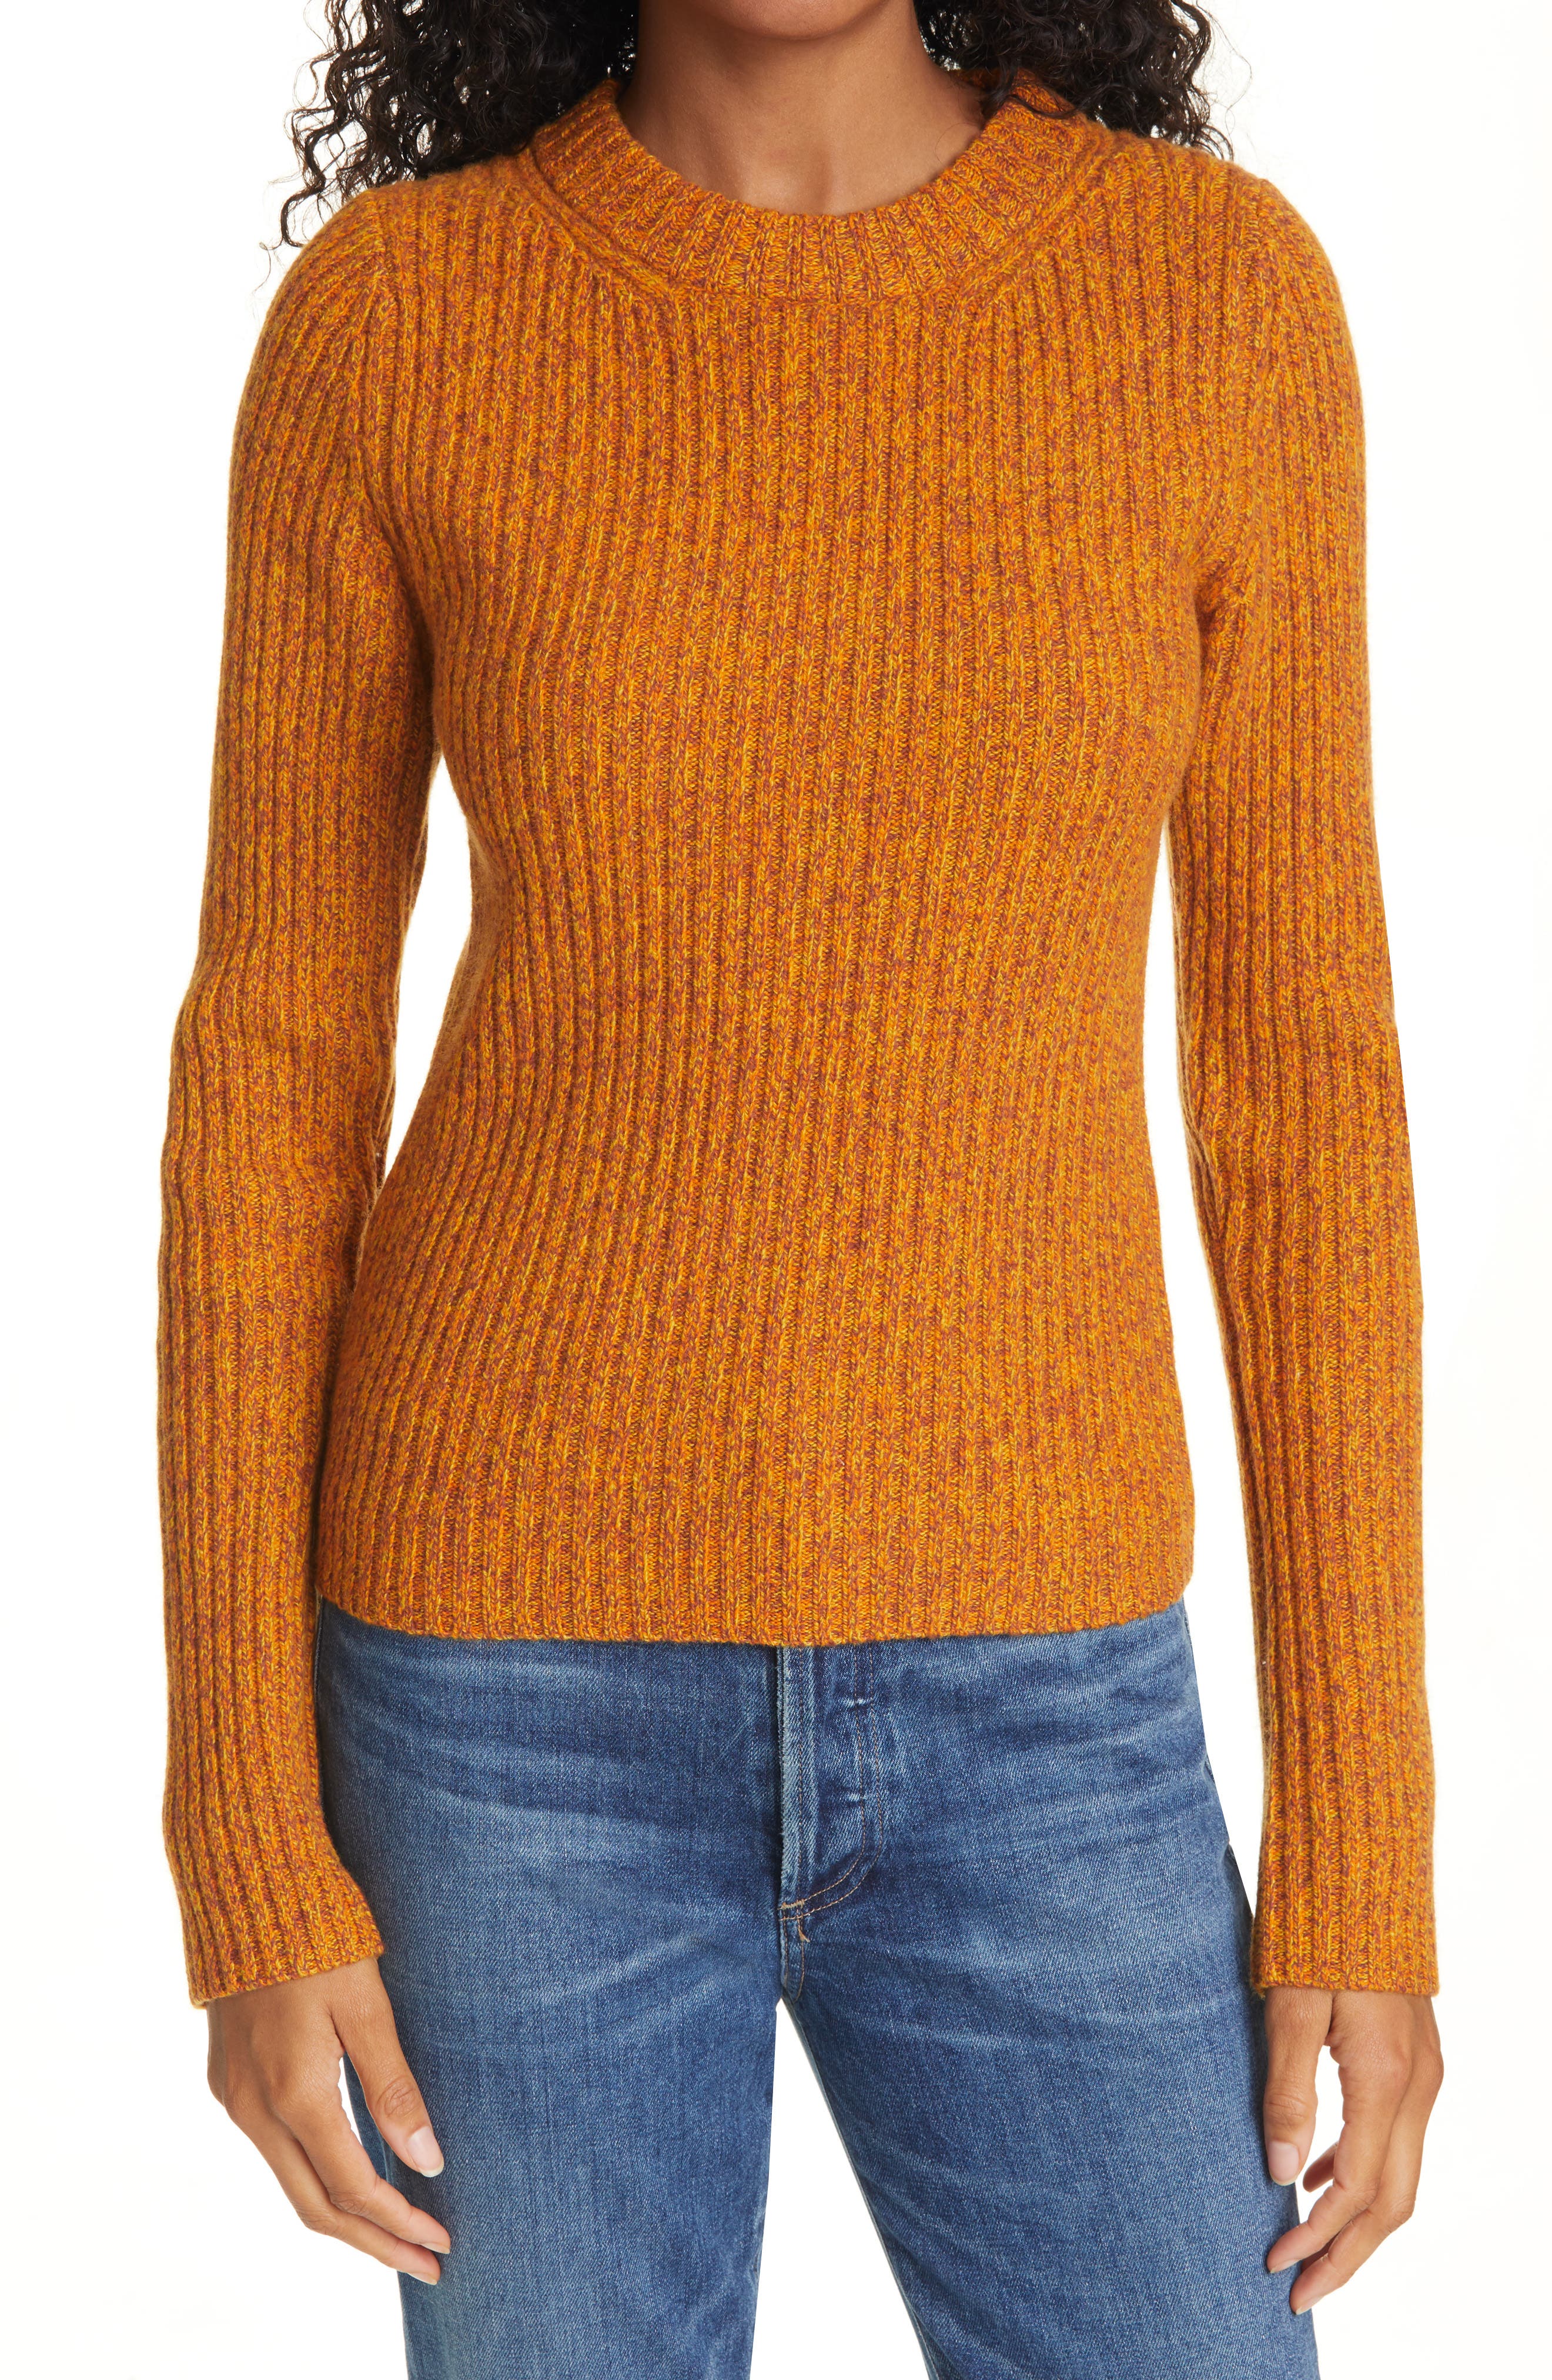 RODEBJER RODBEJER TALENA MOCK NECK WOOL SWEATER,7394067241173